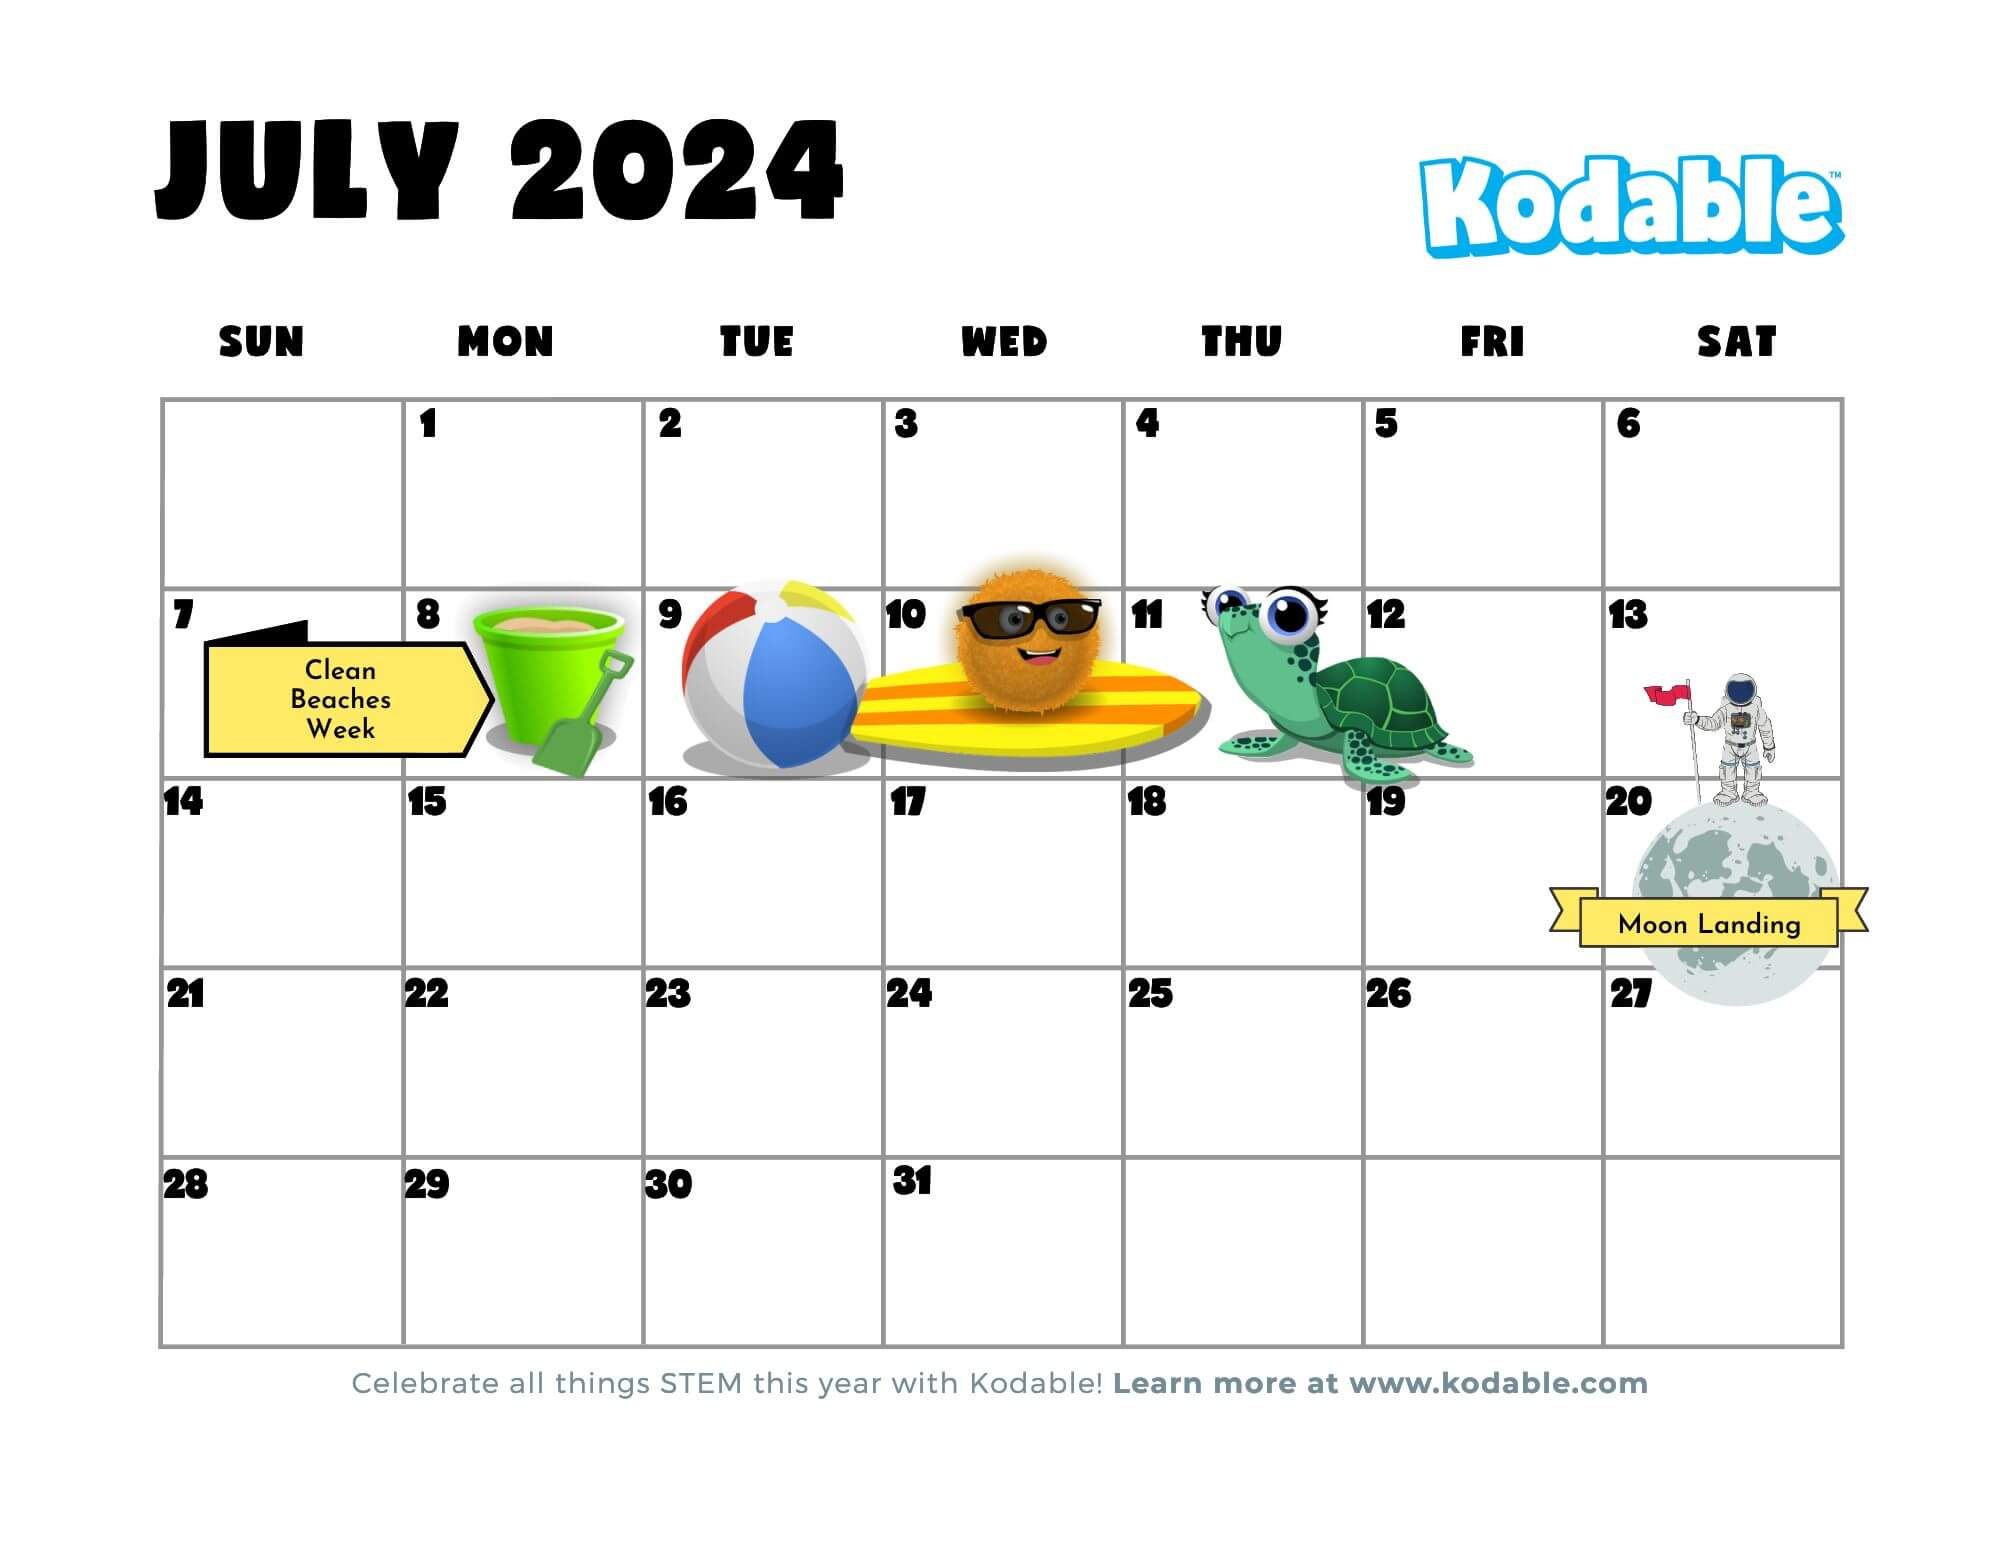 2023-2024 Stem Events Calendar And Holidays For Teachers | Kodable for Calendar Events in July 2024